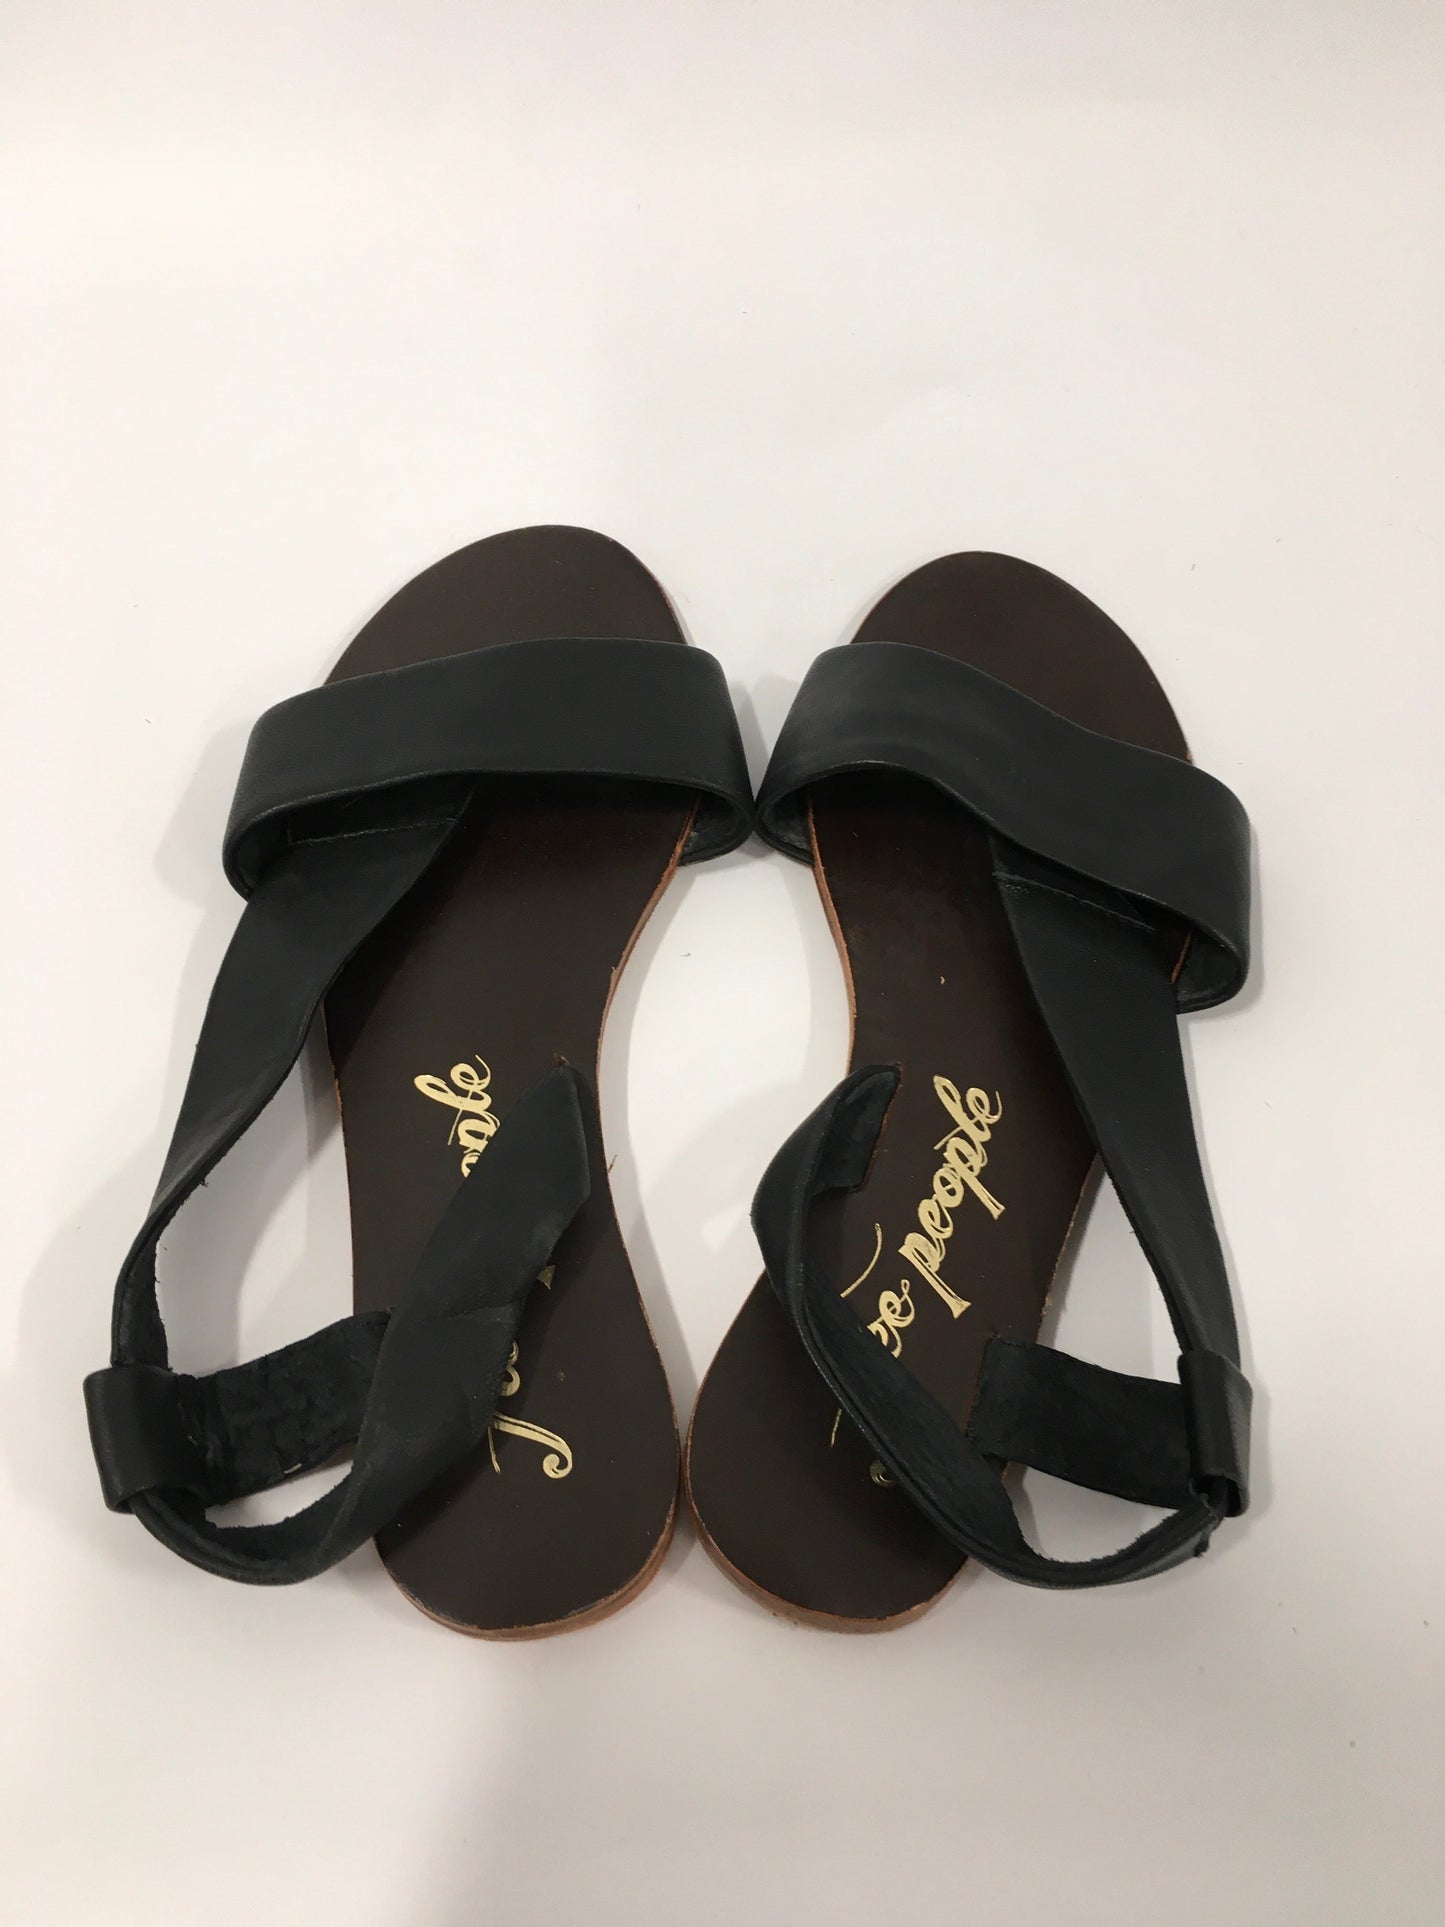 Black Shoes Flats Free People, Size 6